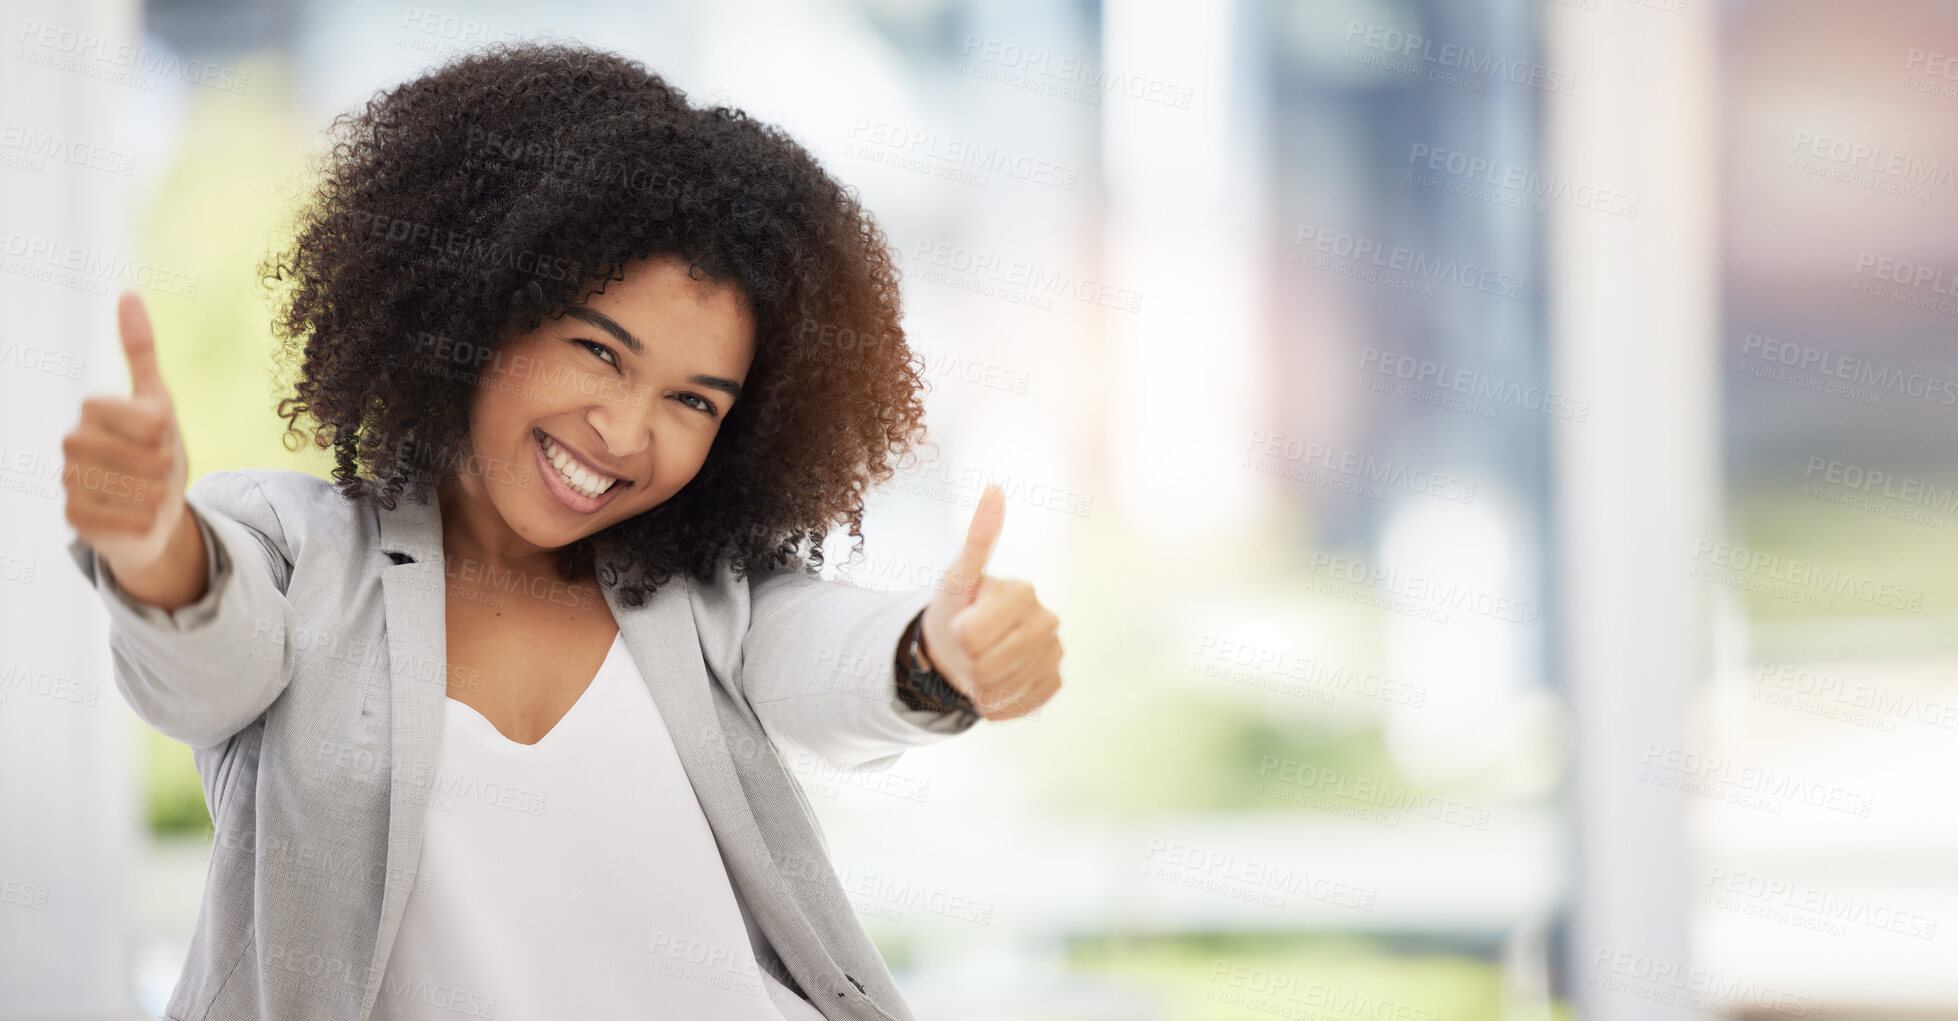 Buy stock photo Thumbs up, success and business girl excited with achievement of goals, startup company growth or job venture. Mockup emoji hands sign, positive feedback and black woman with energy and yes gesture